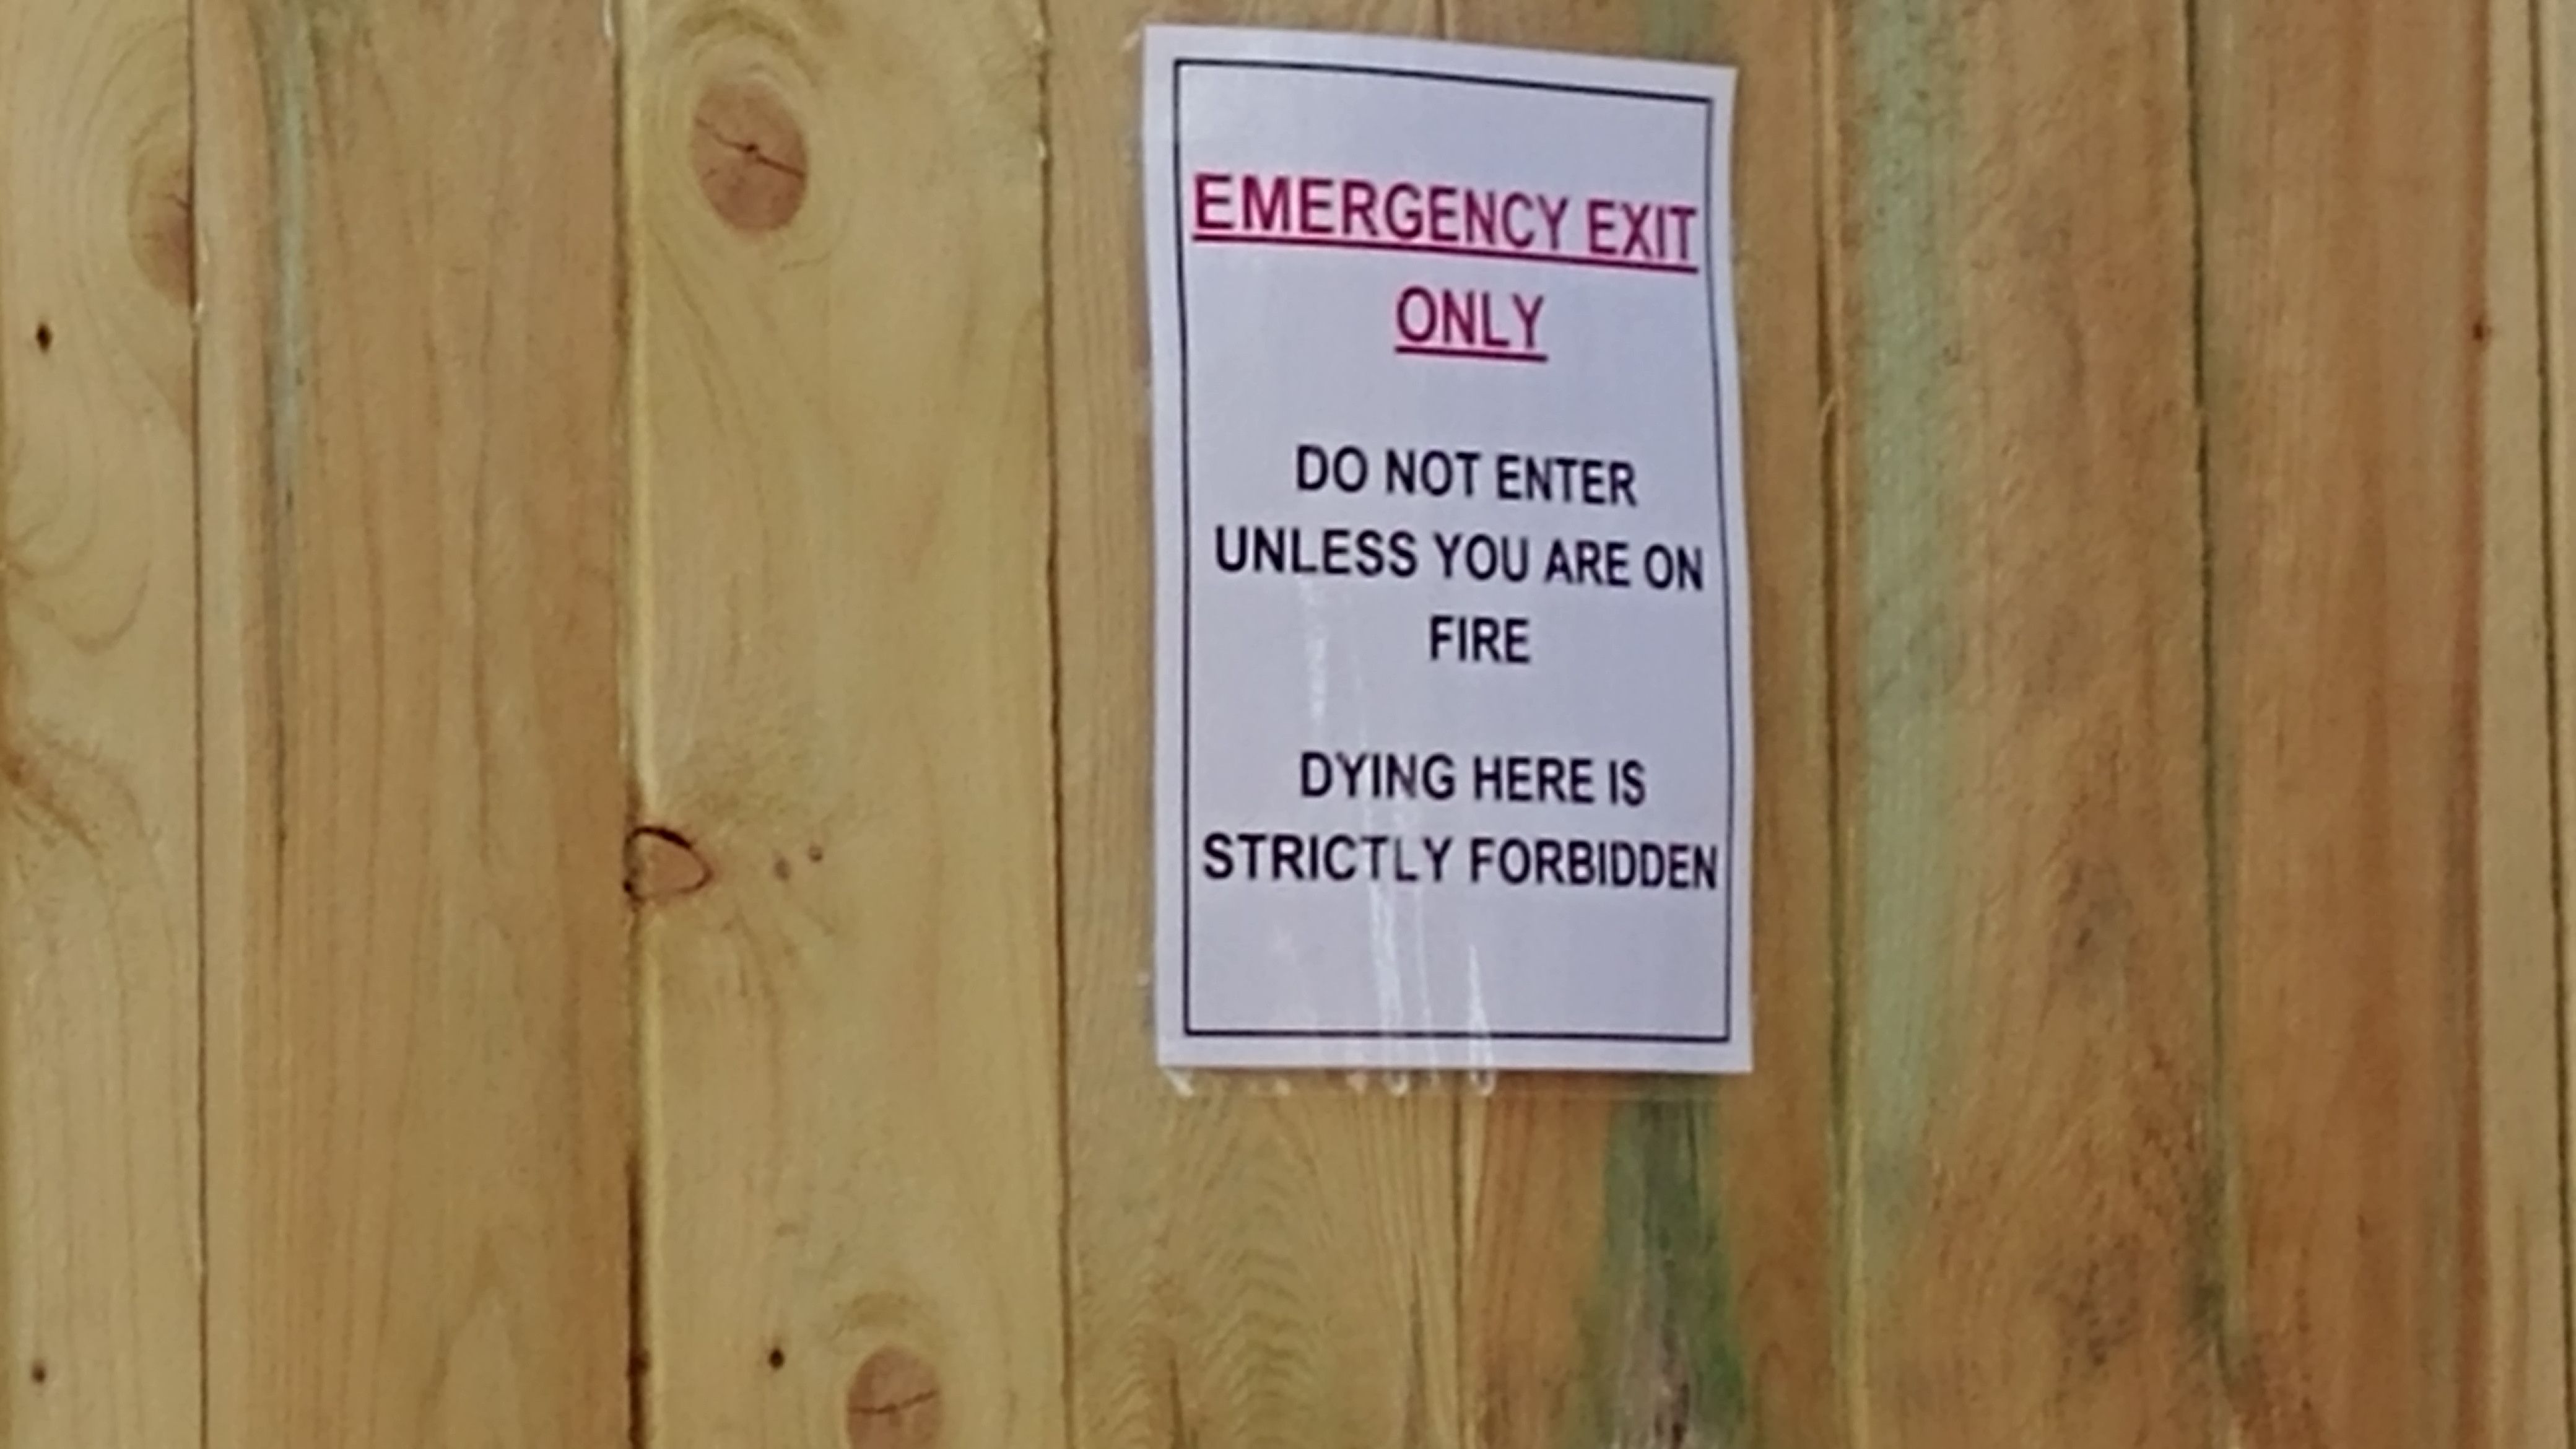 Emergency exit only!!